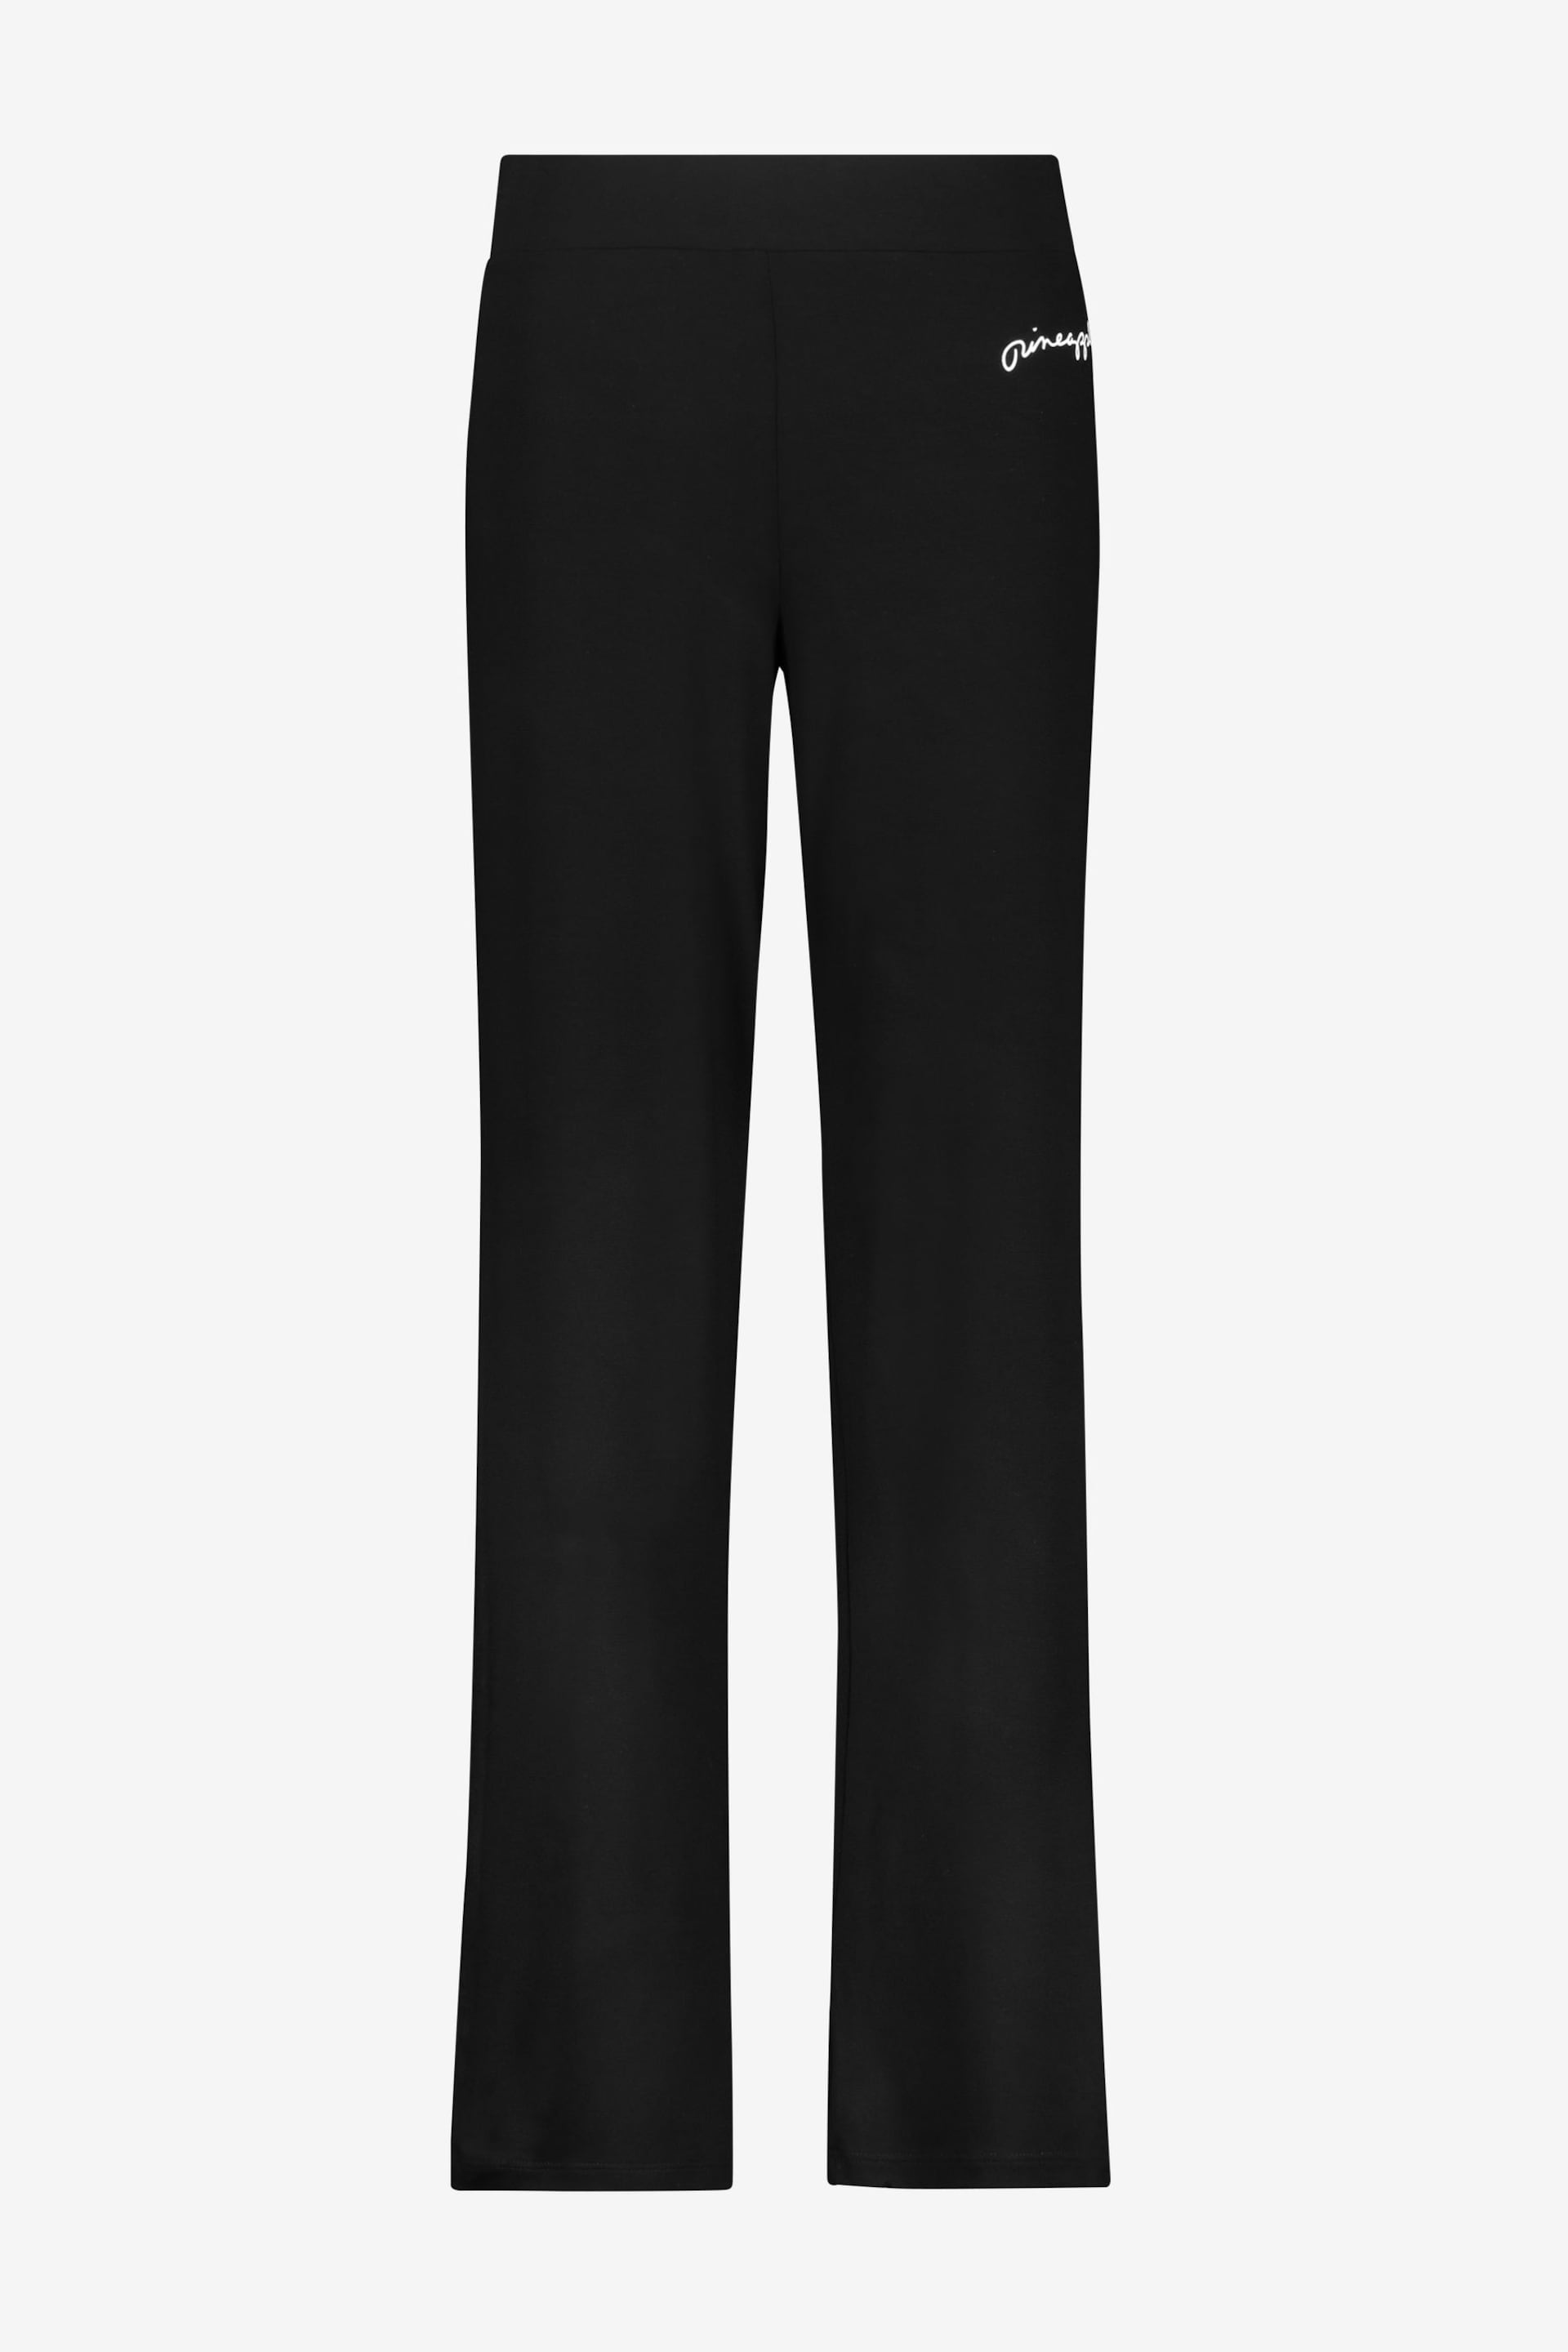 Pineapple Black Viscose Jersey Trousers - Image 3 of 3